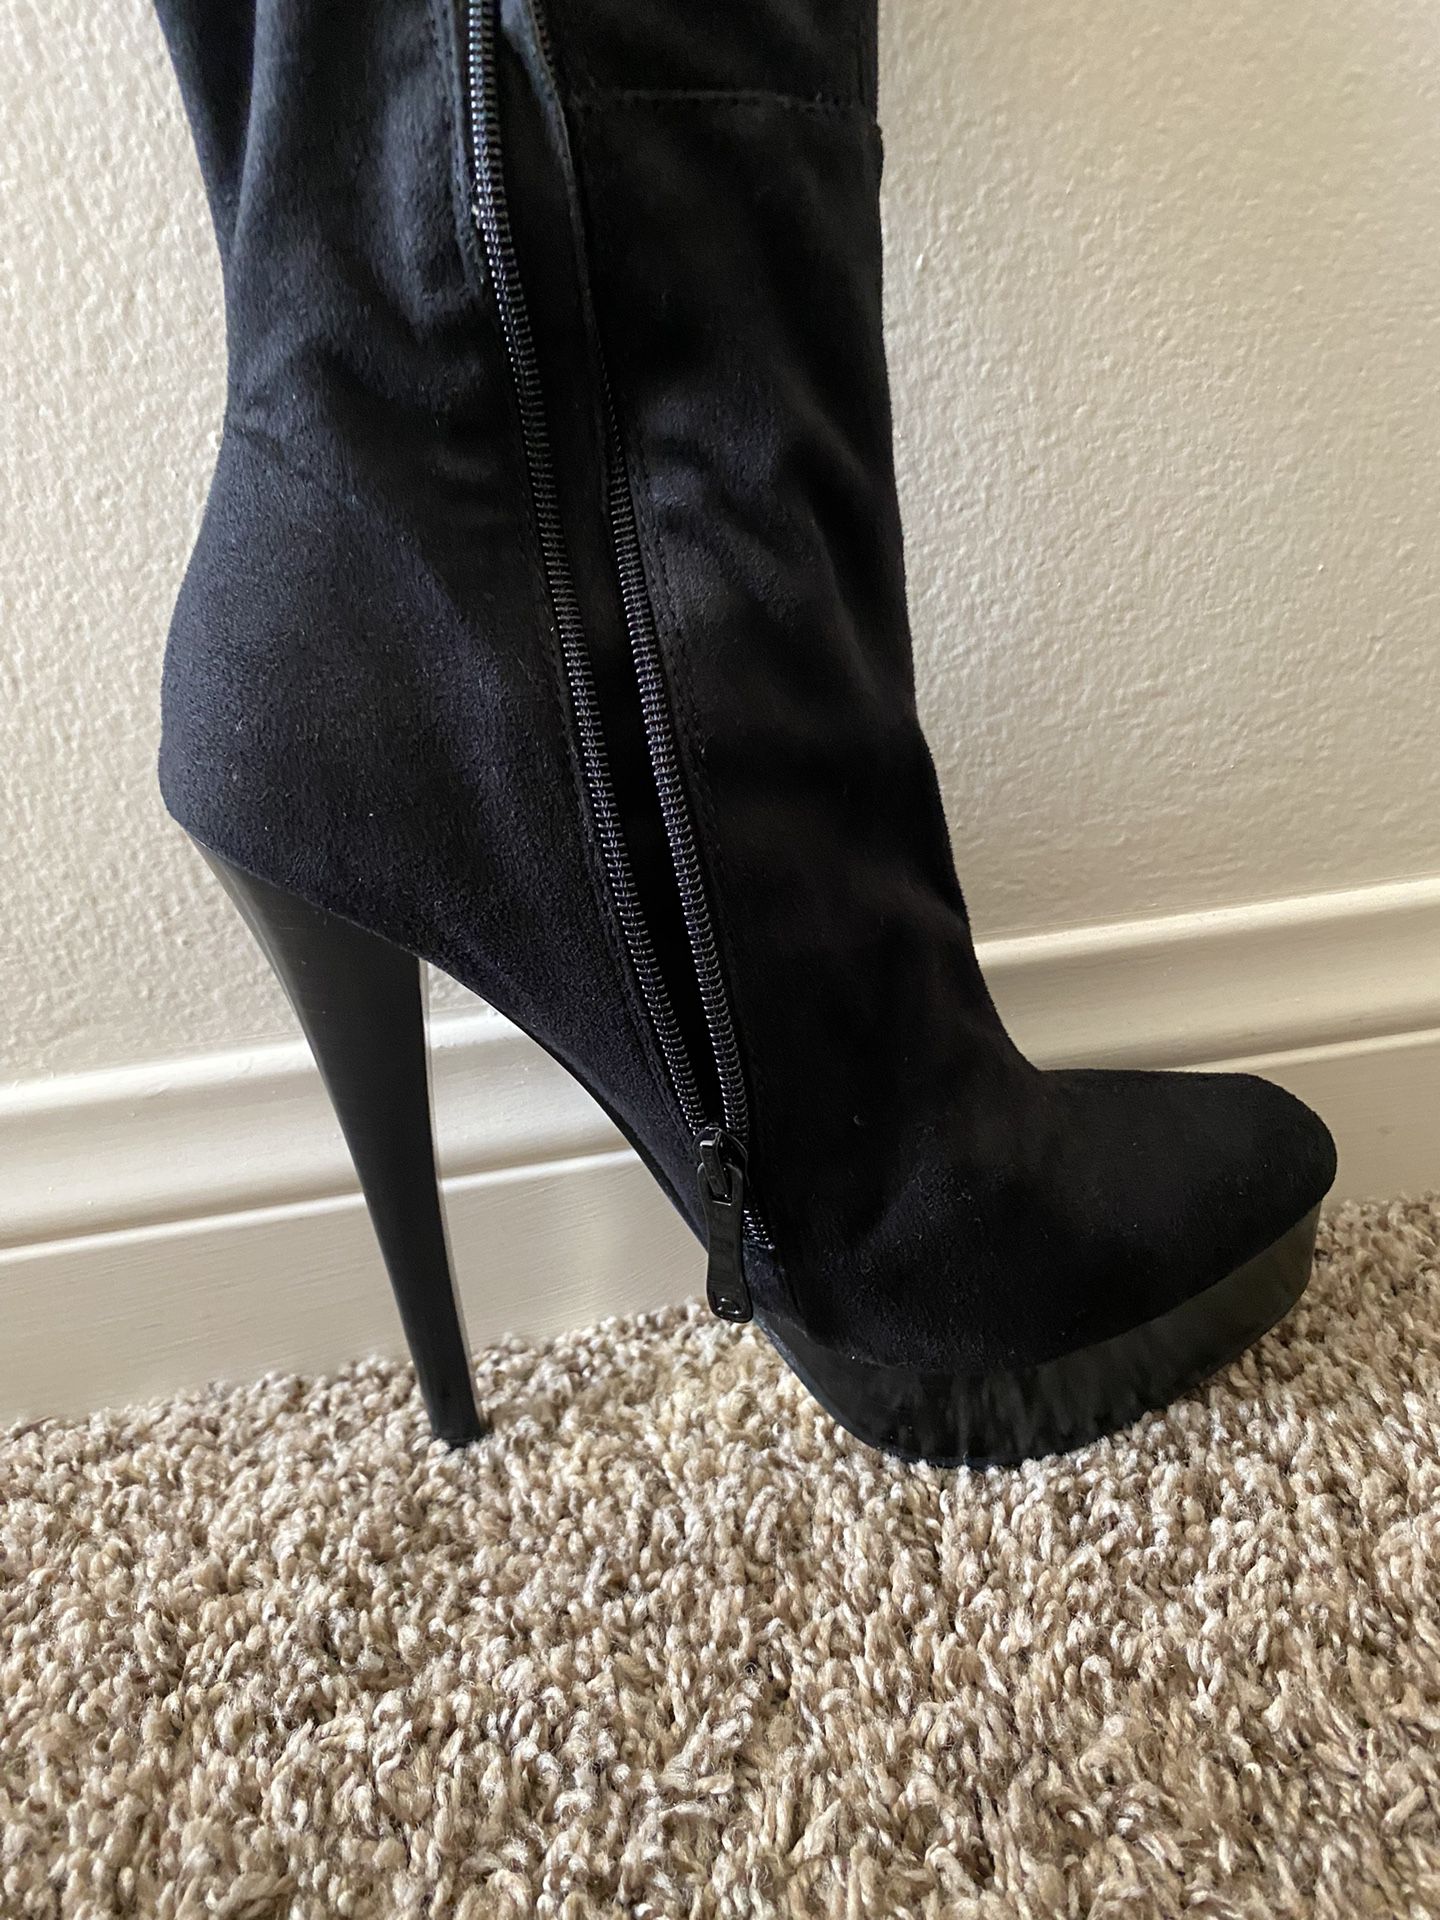 Black Thigh High Suede Boots By bebe Size 8